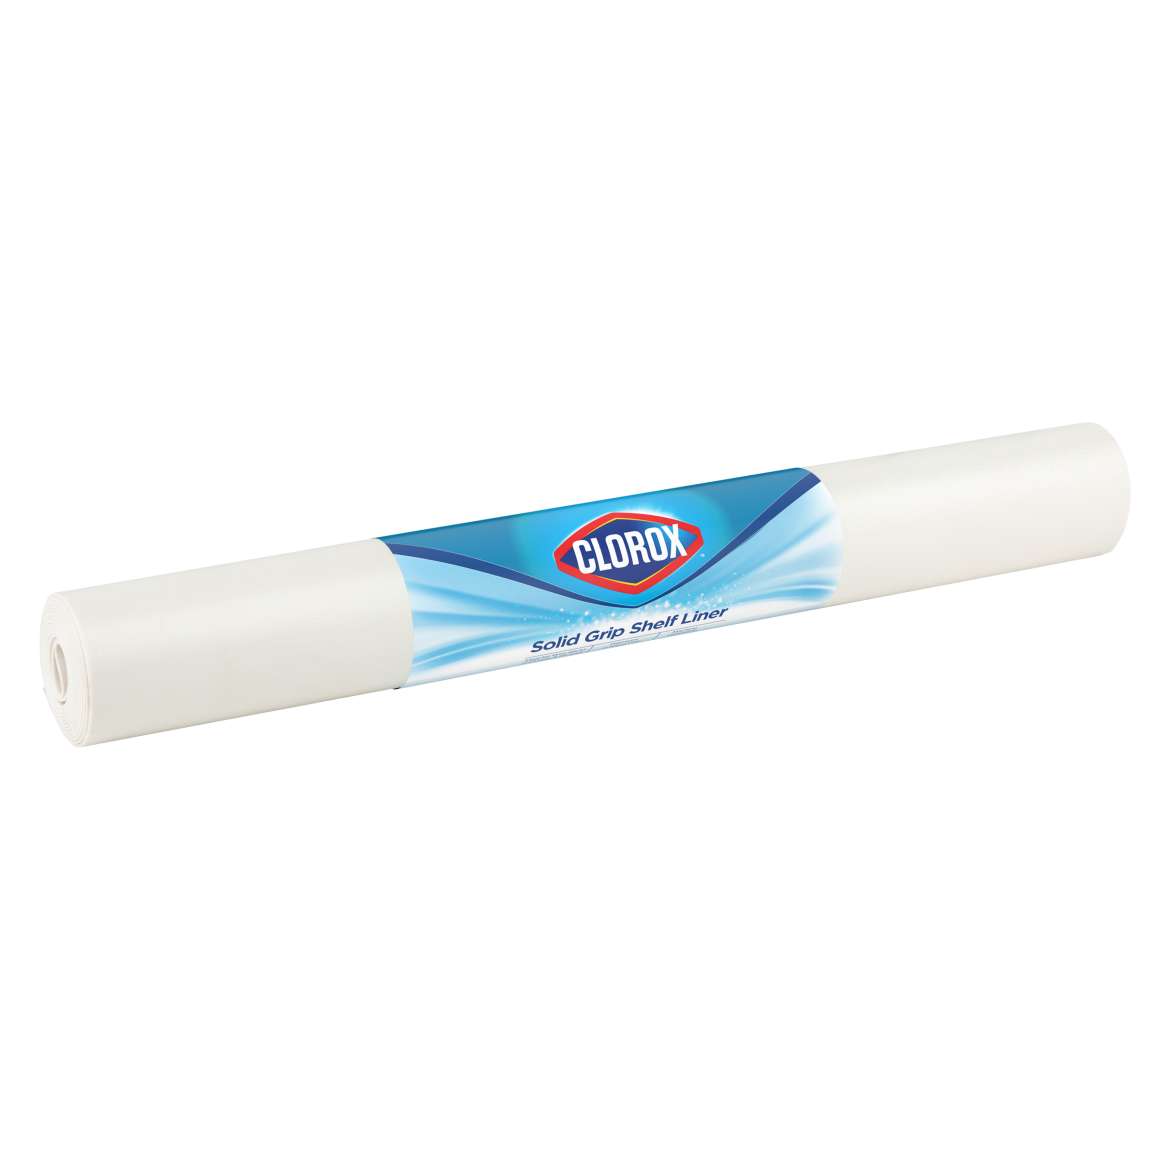 Solid Grip Shelf Liner with Clorox®